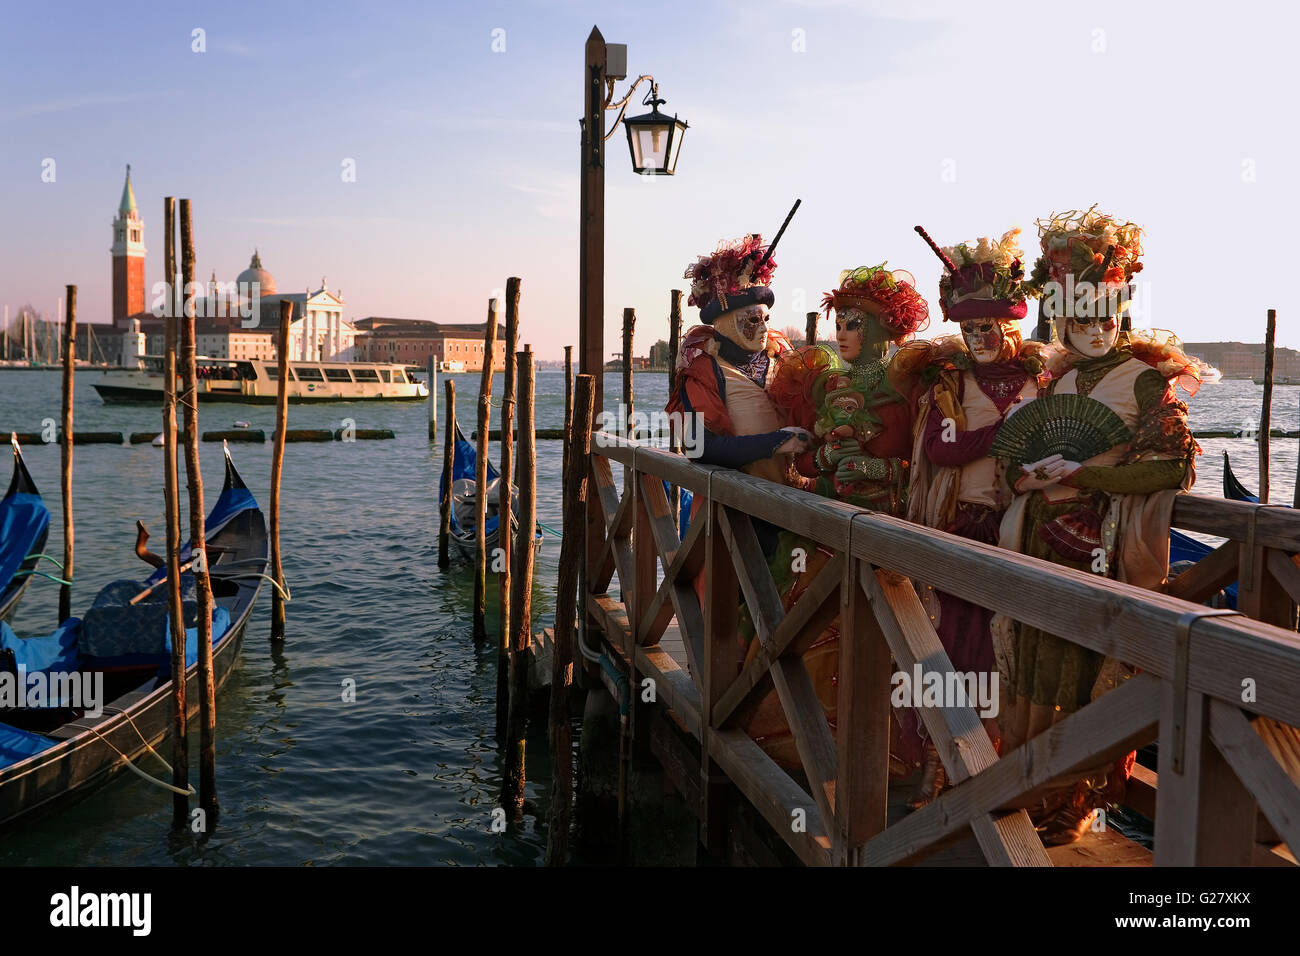 Venice Carnival: San Marco, Venice, Italy.  Carnival revellers pose in front of the Basin of St Mark, with the church of San Giorgio Maggiore beyond Stock Photo